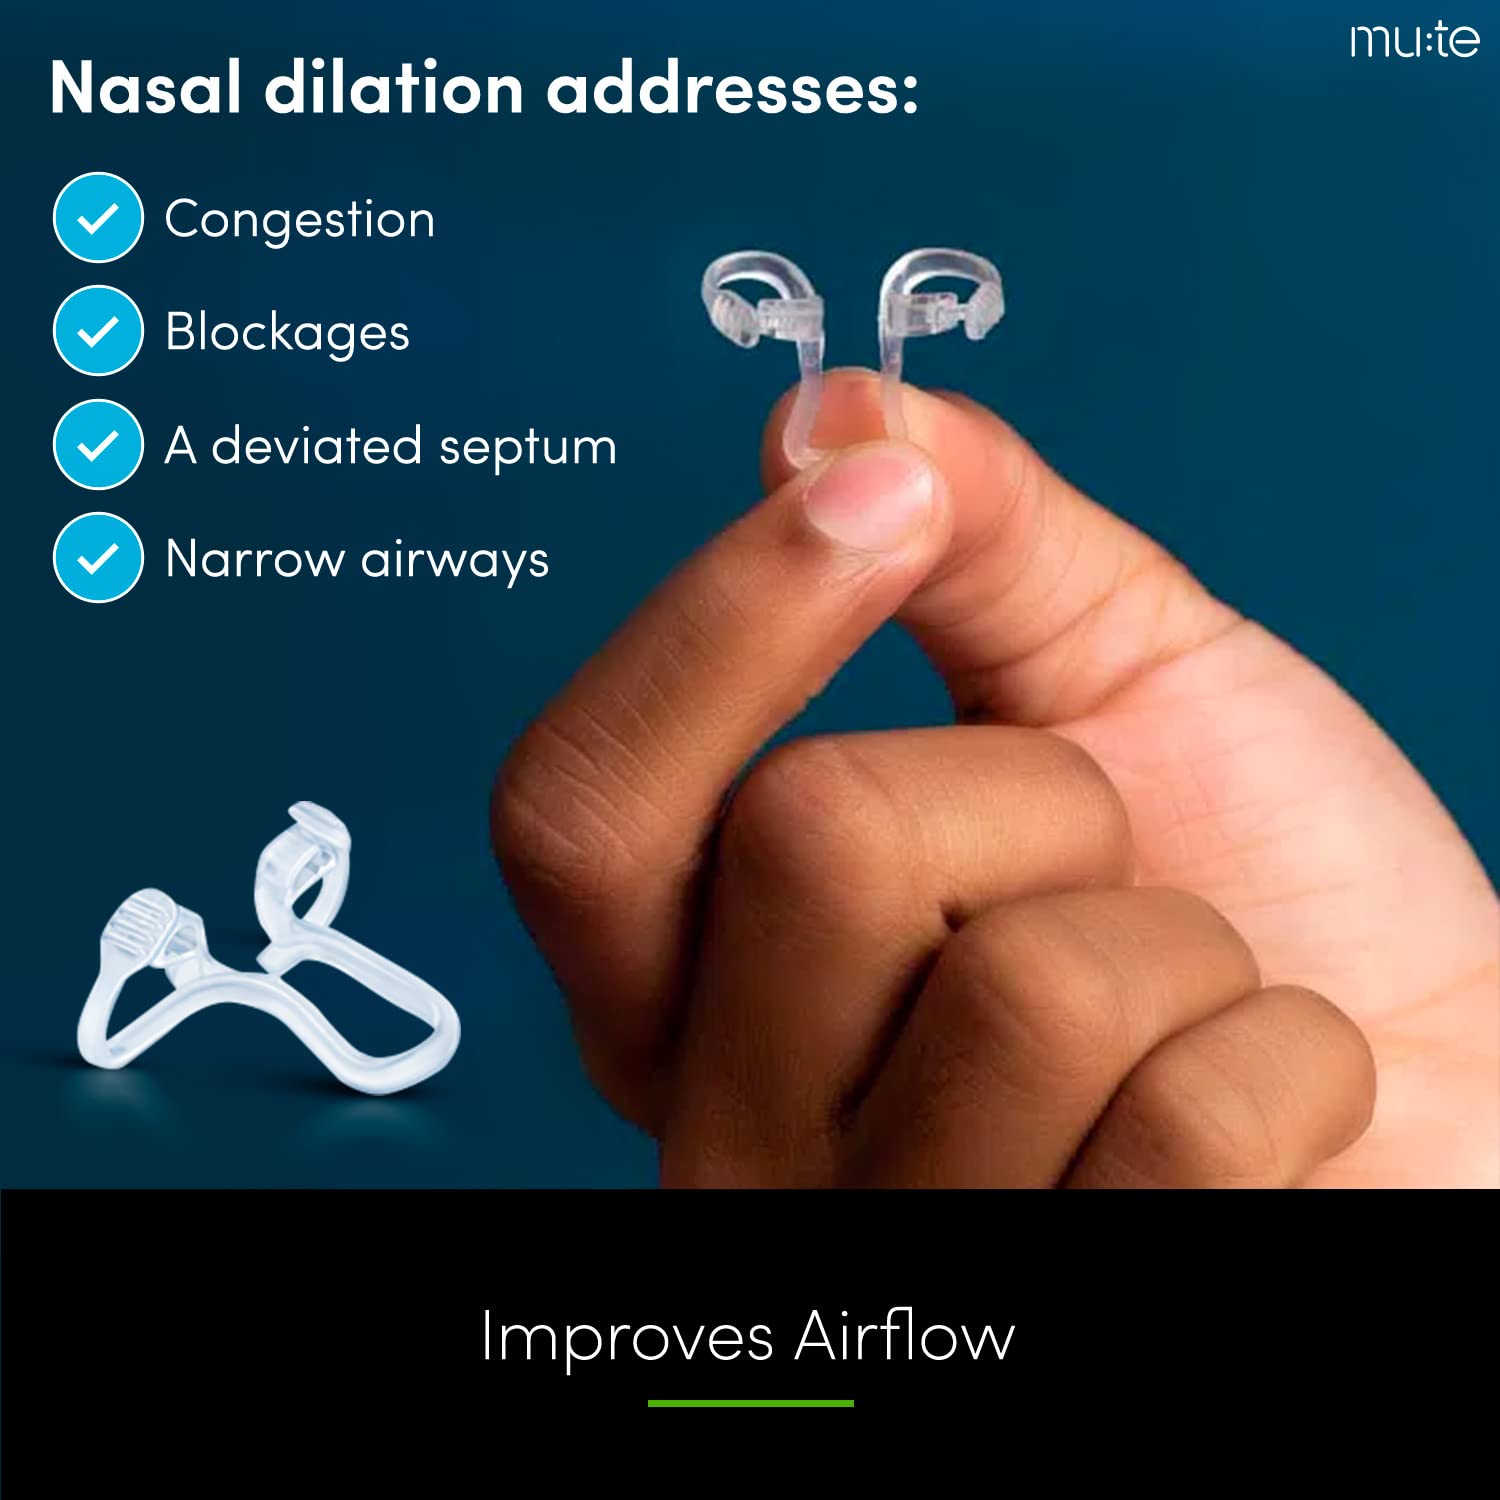 Rhinomed Mute Nasal Dilator for Snore Reduction - Anti-Snoring Aid Solution - Improve Airflow - Comfortable Nose Vents, Breathing Aids for Better Sleep - (Size Medium, 3-Pk)